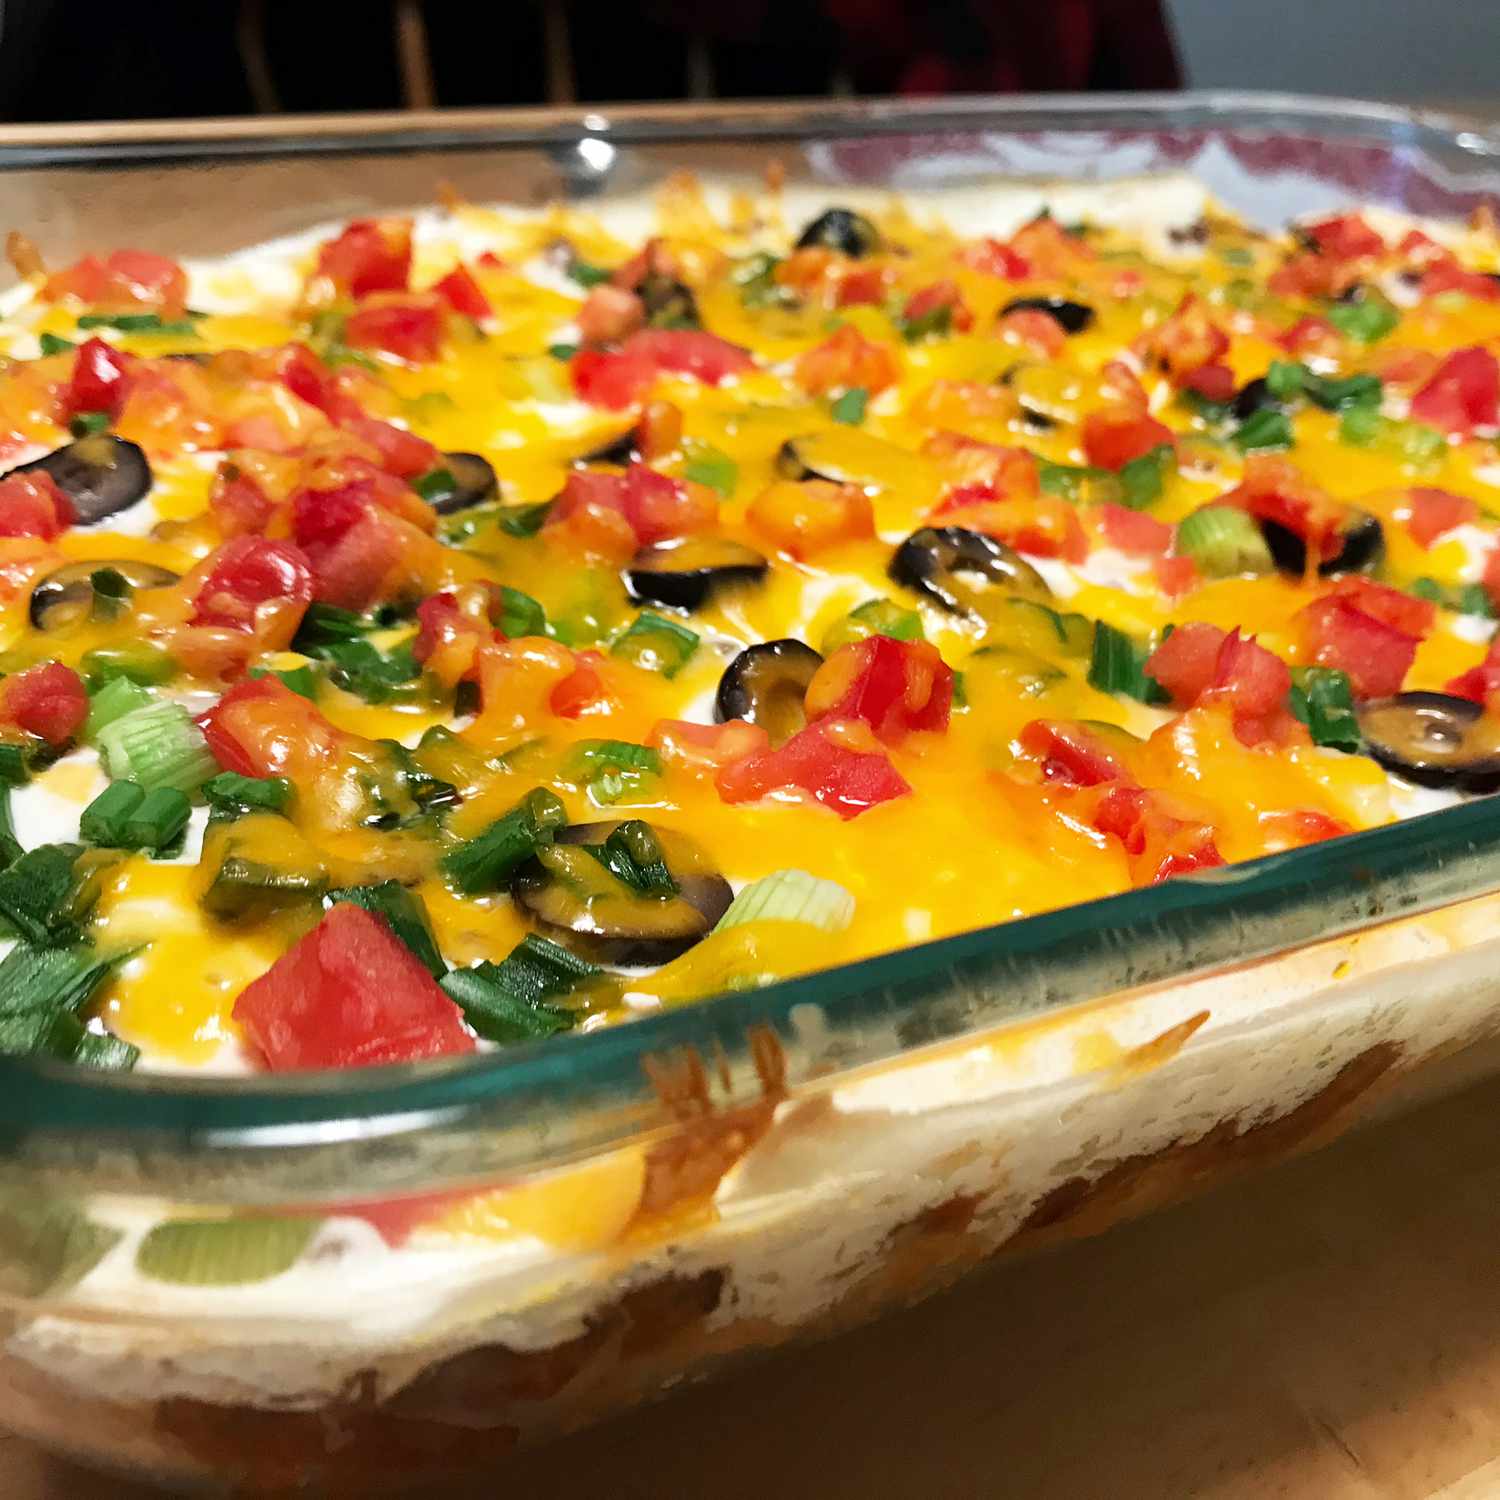 Close up view of a Mexican casserole in a glass baking dish